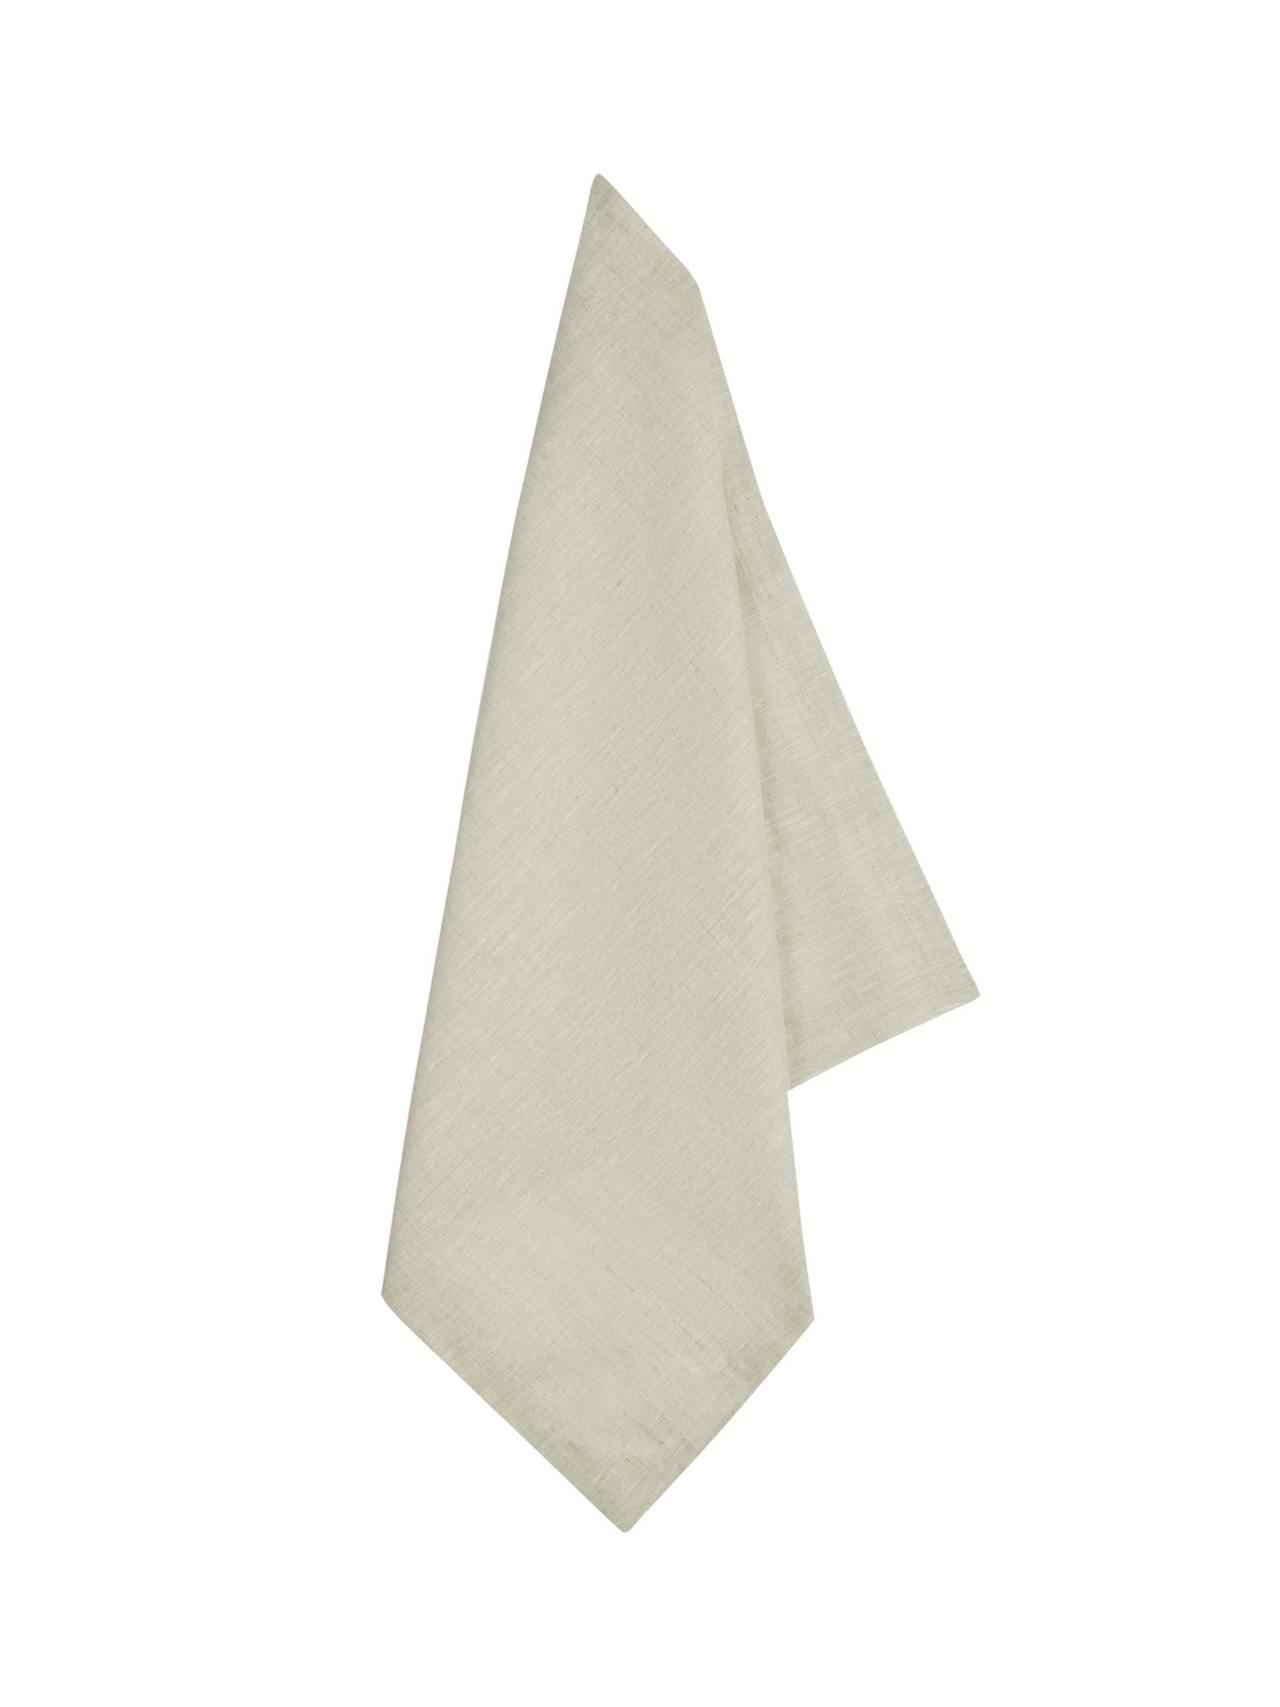 The perfect linen napkins, set of 4